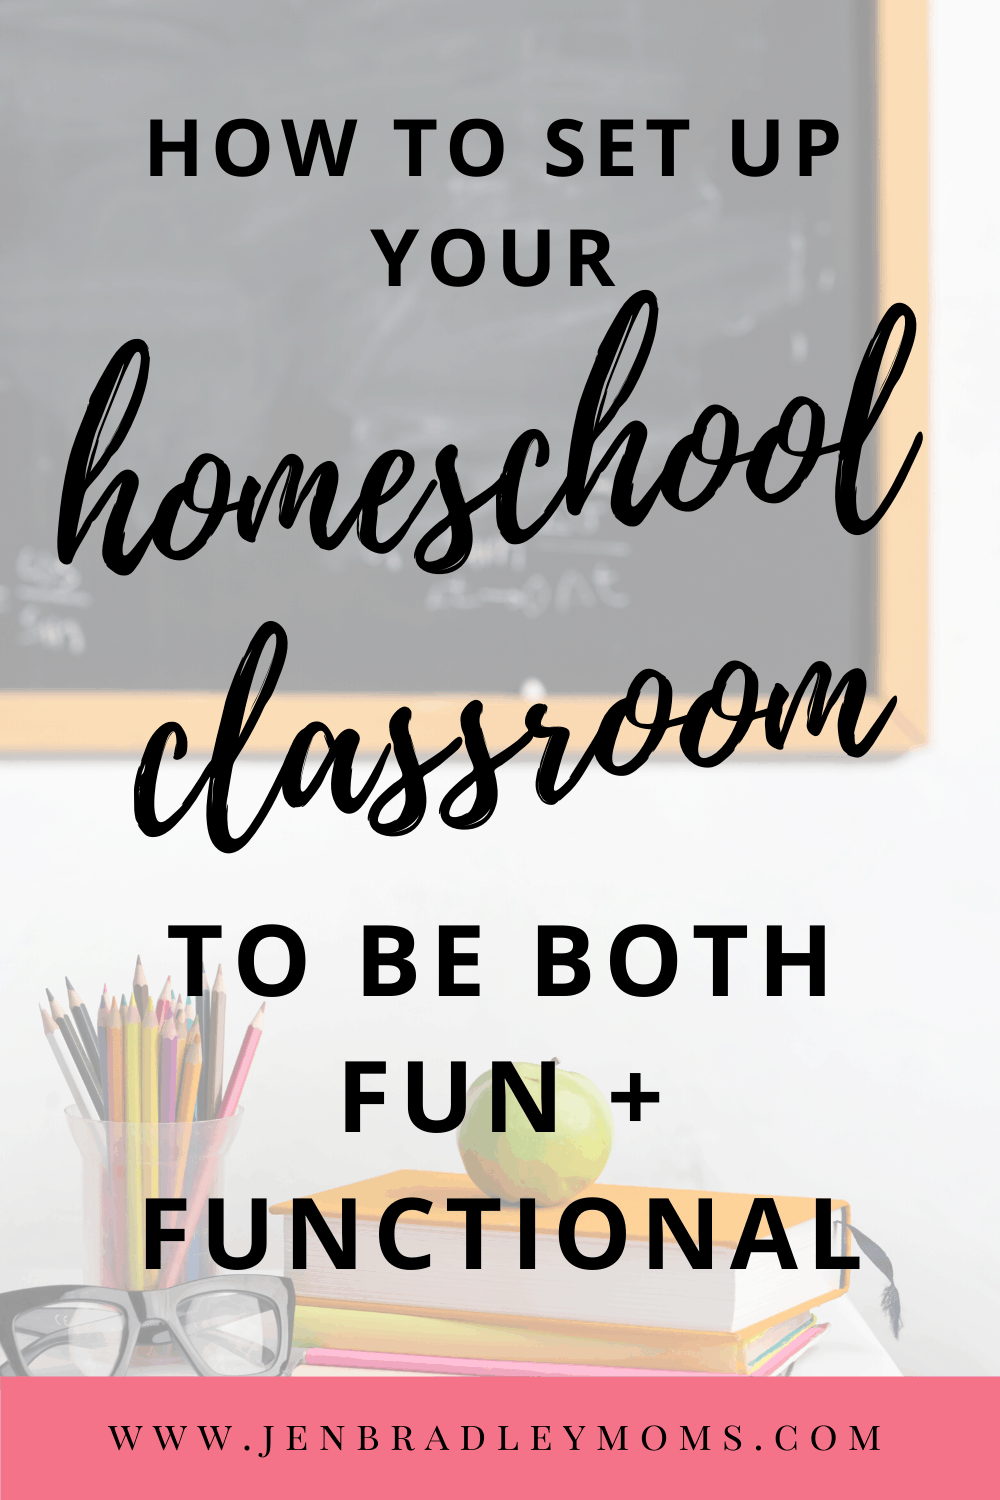 How to Set Up the Best Homeschool Classroom for Your Family